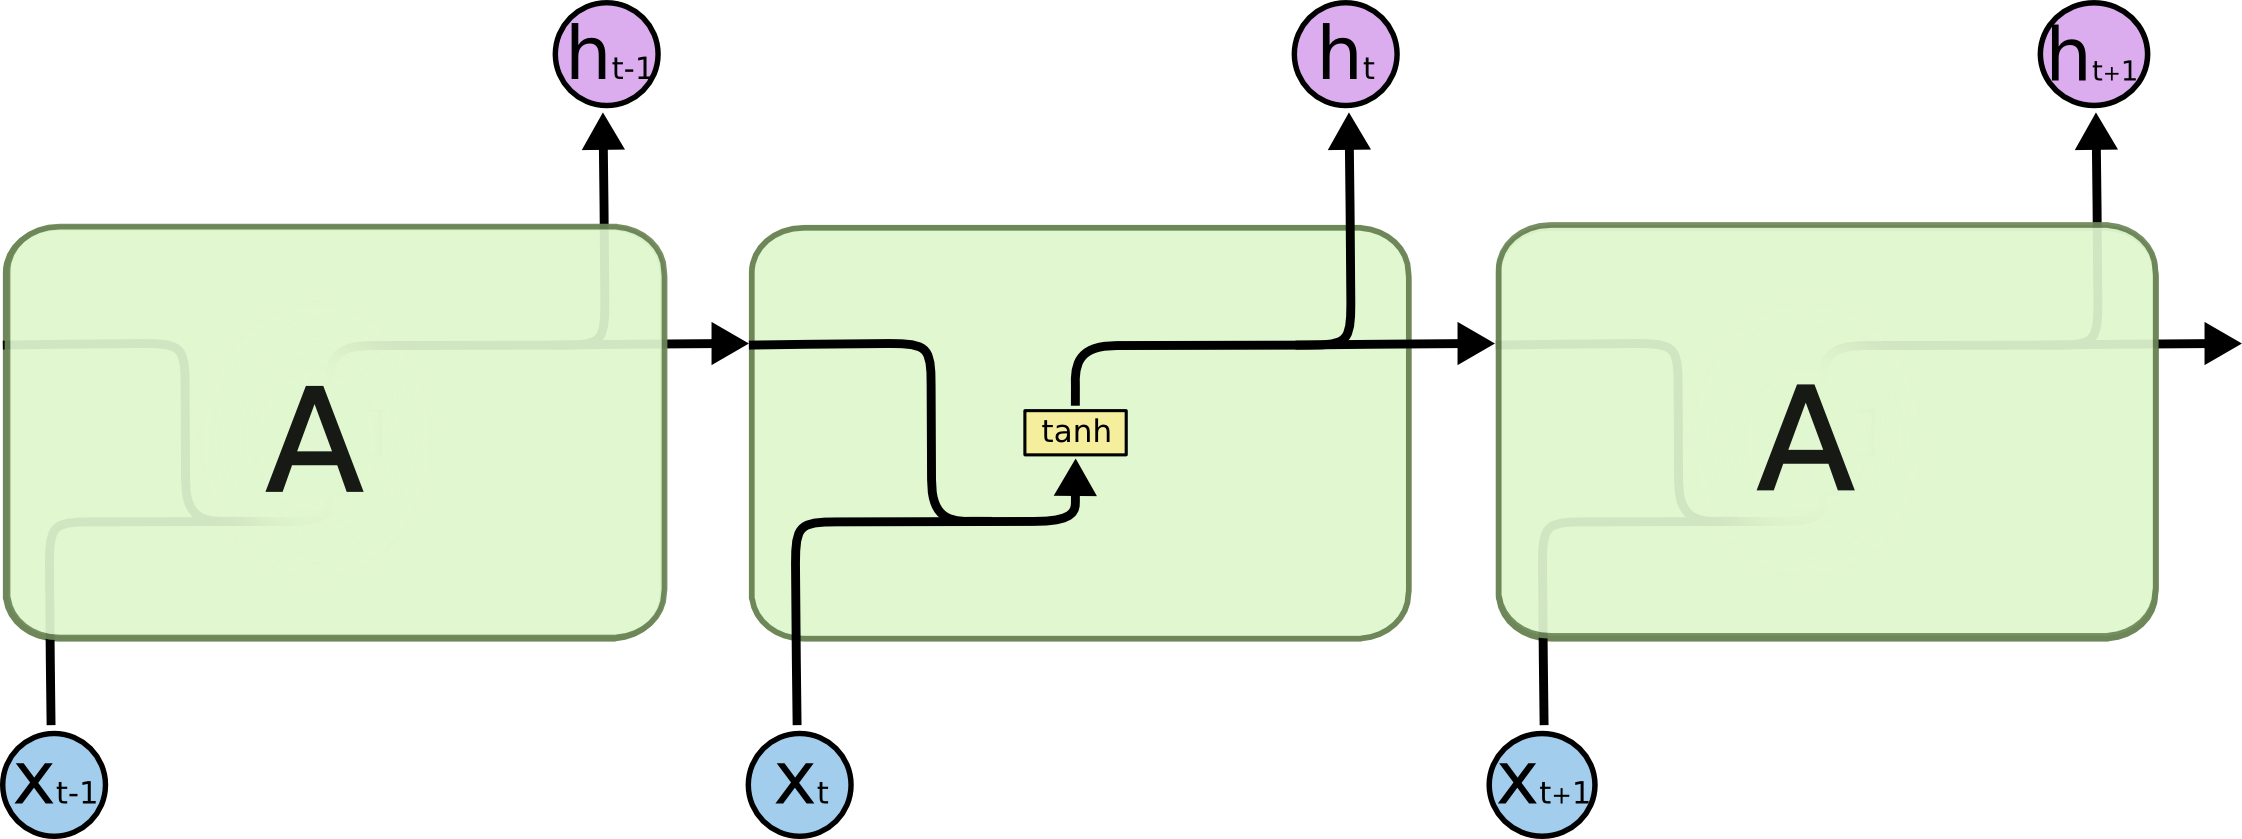 The repeating module in a standard RNN contains a single layer